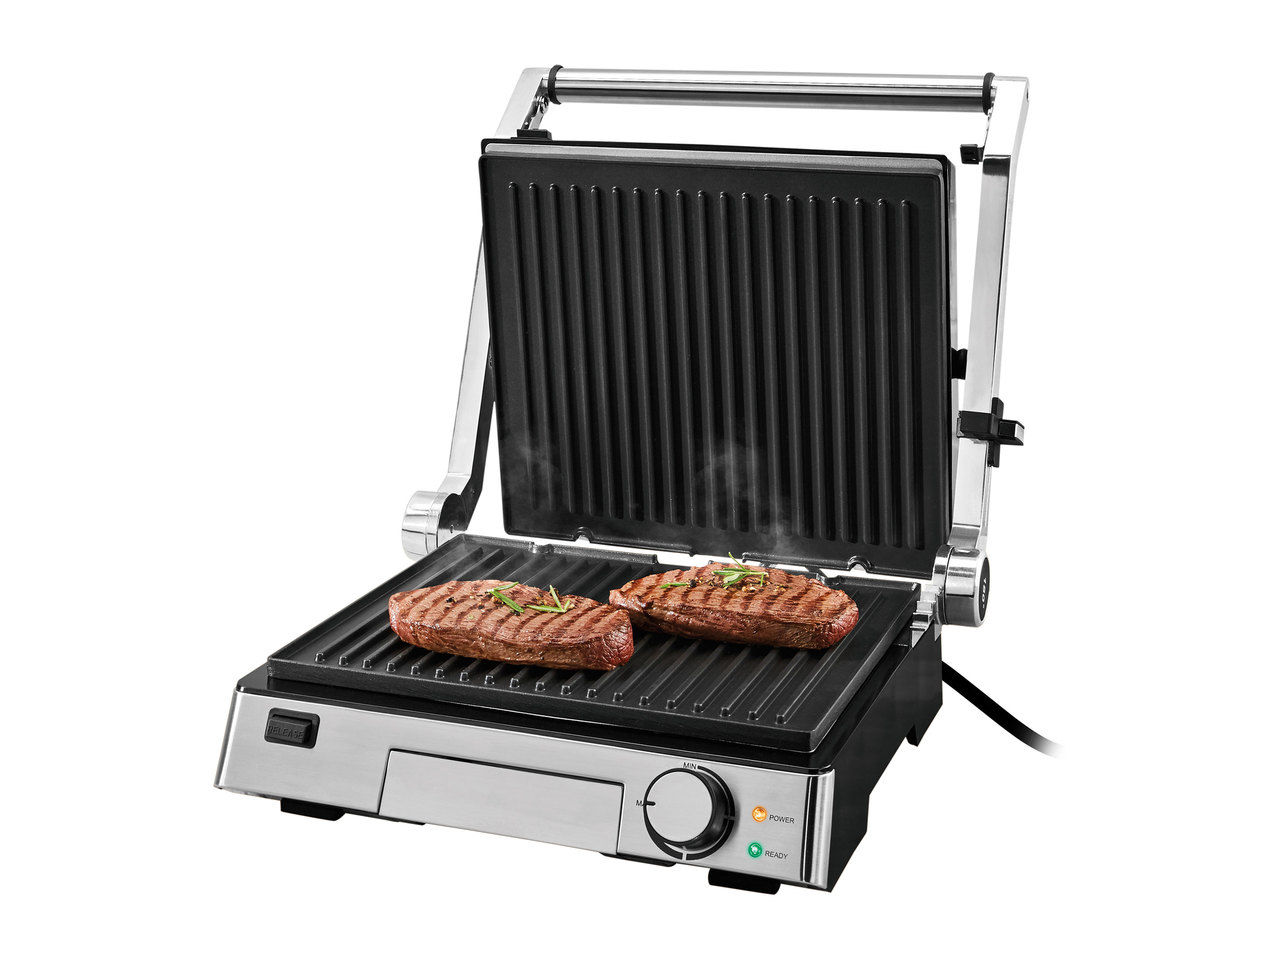 Silvercrest Contact Grill1